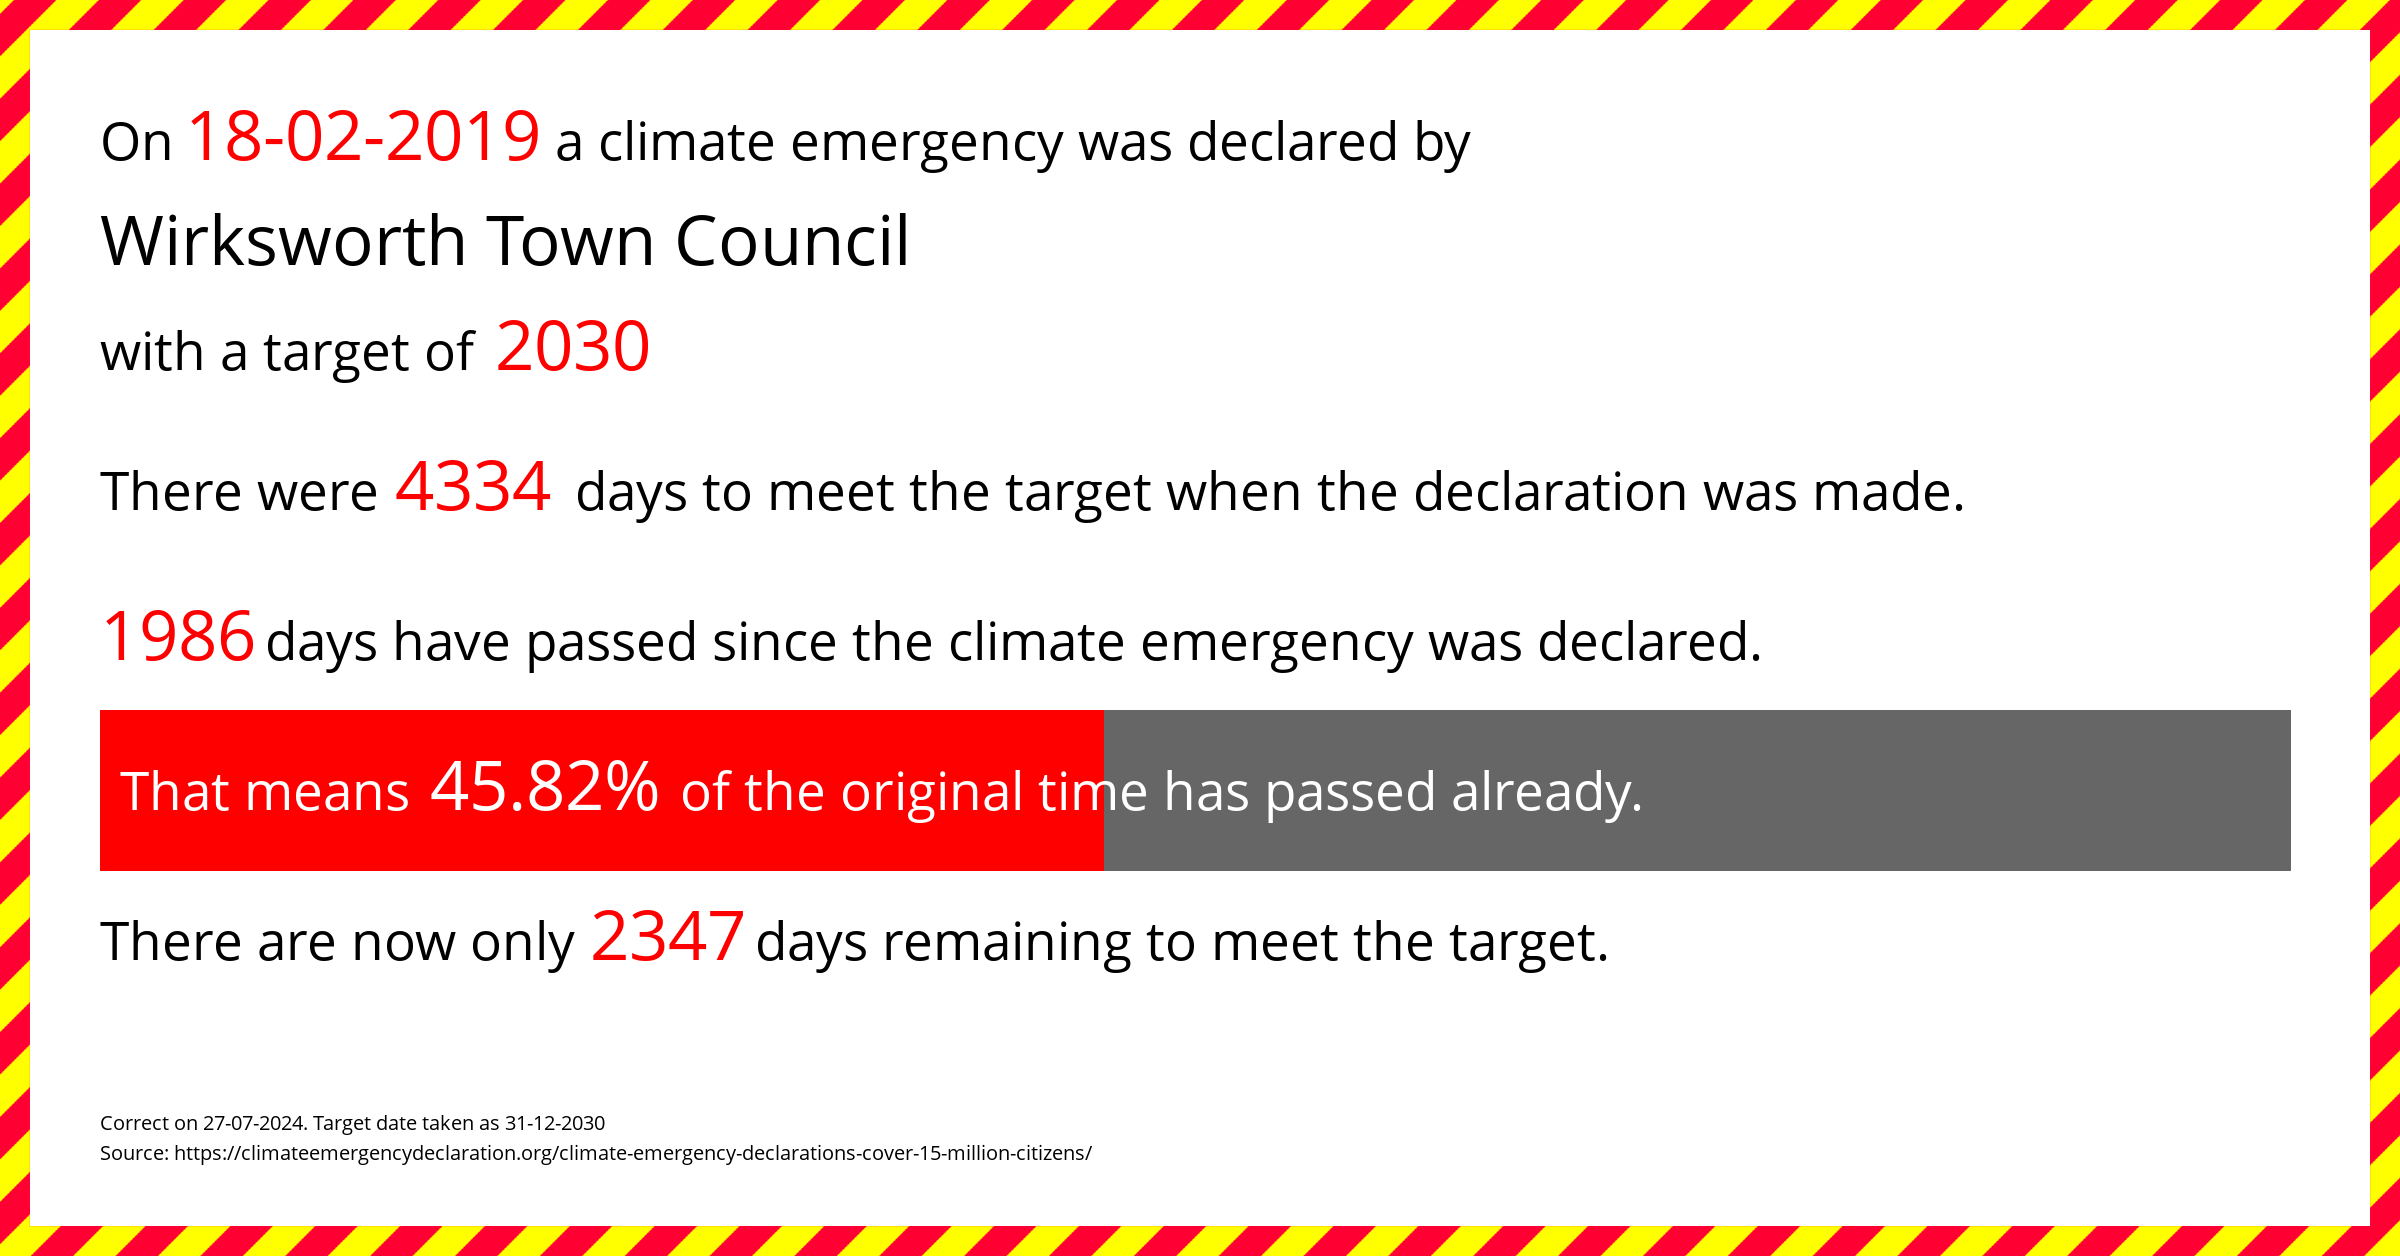 Wirksworth Town Council declared a Climate emergency on Monday 18th February 2019, with a target of 2030.